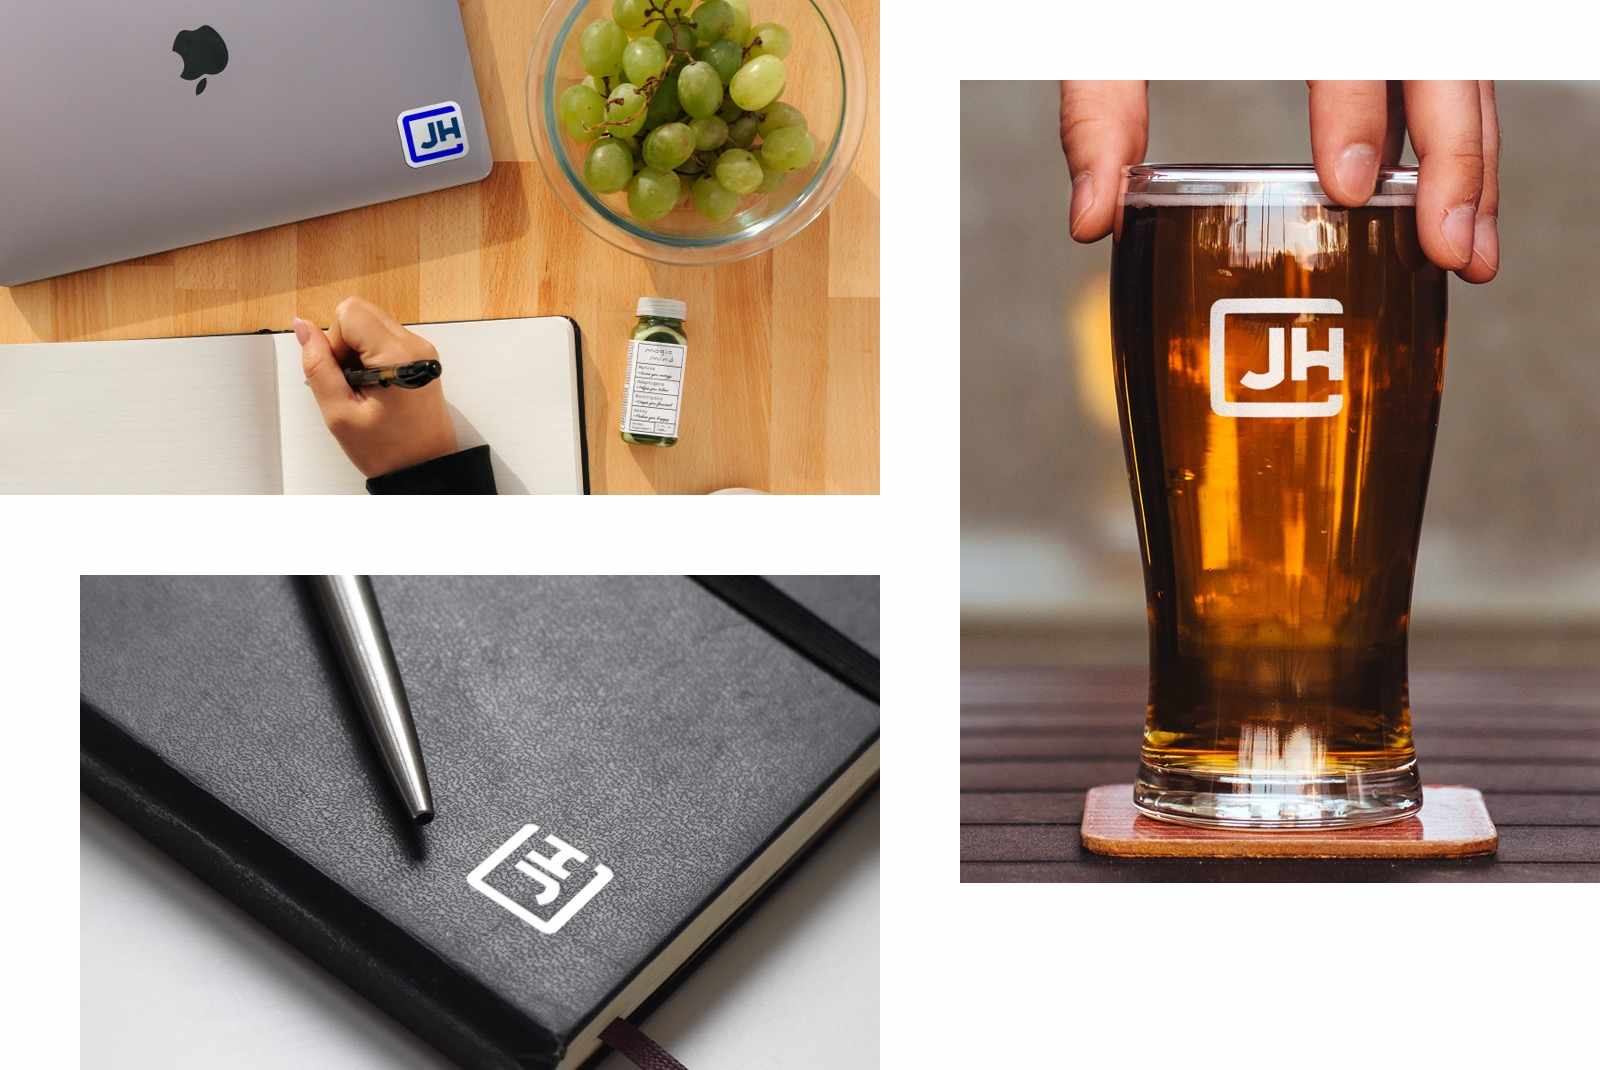 JH Logo on Promotional Items